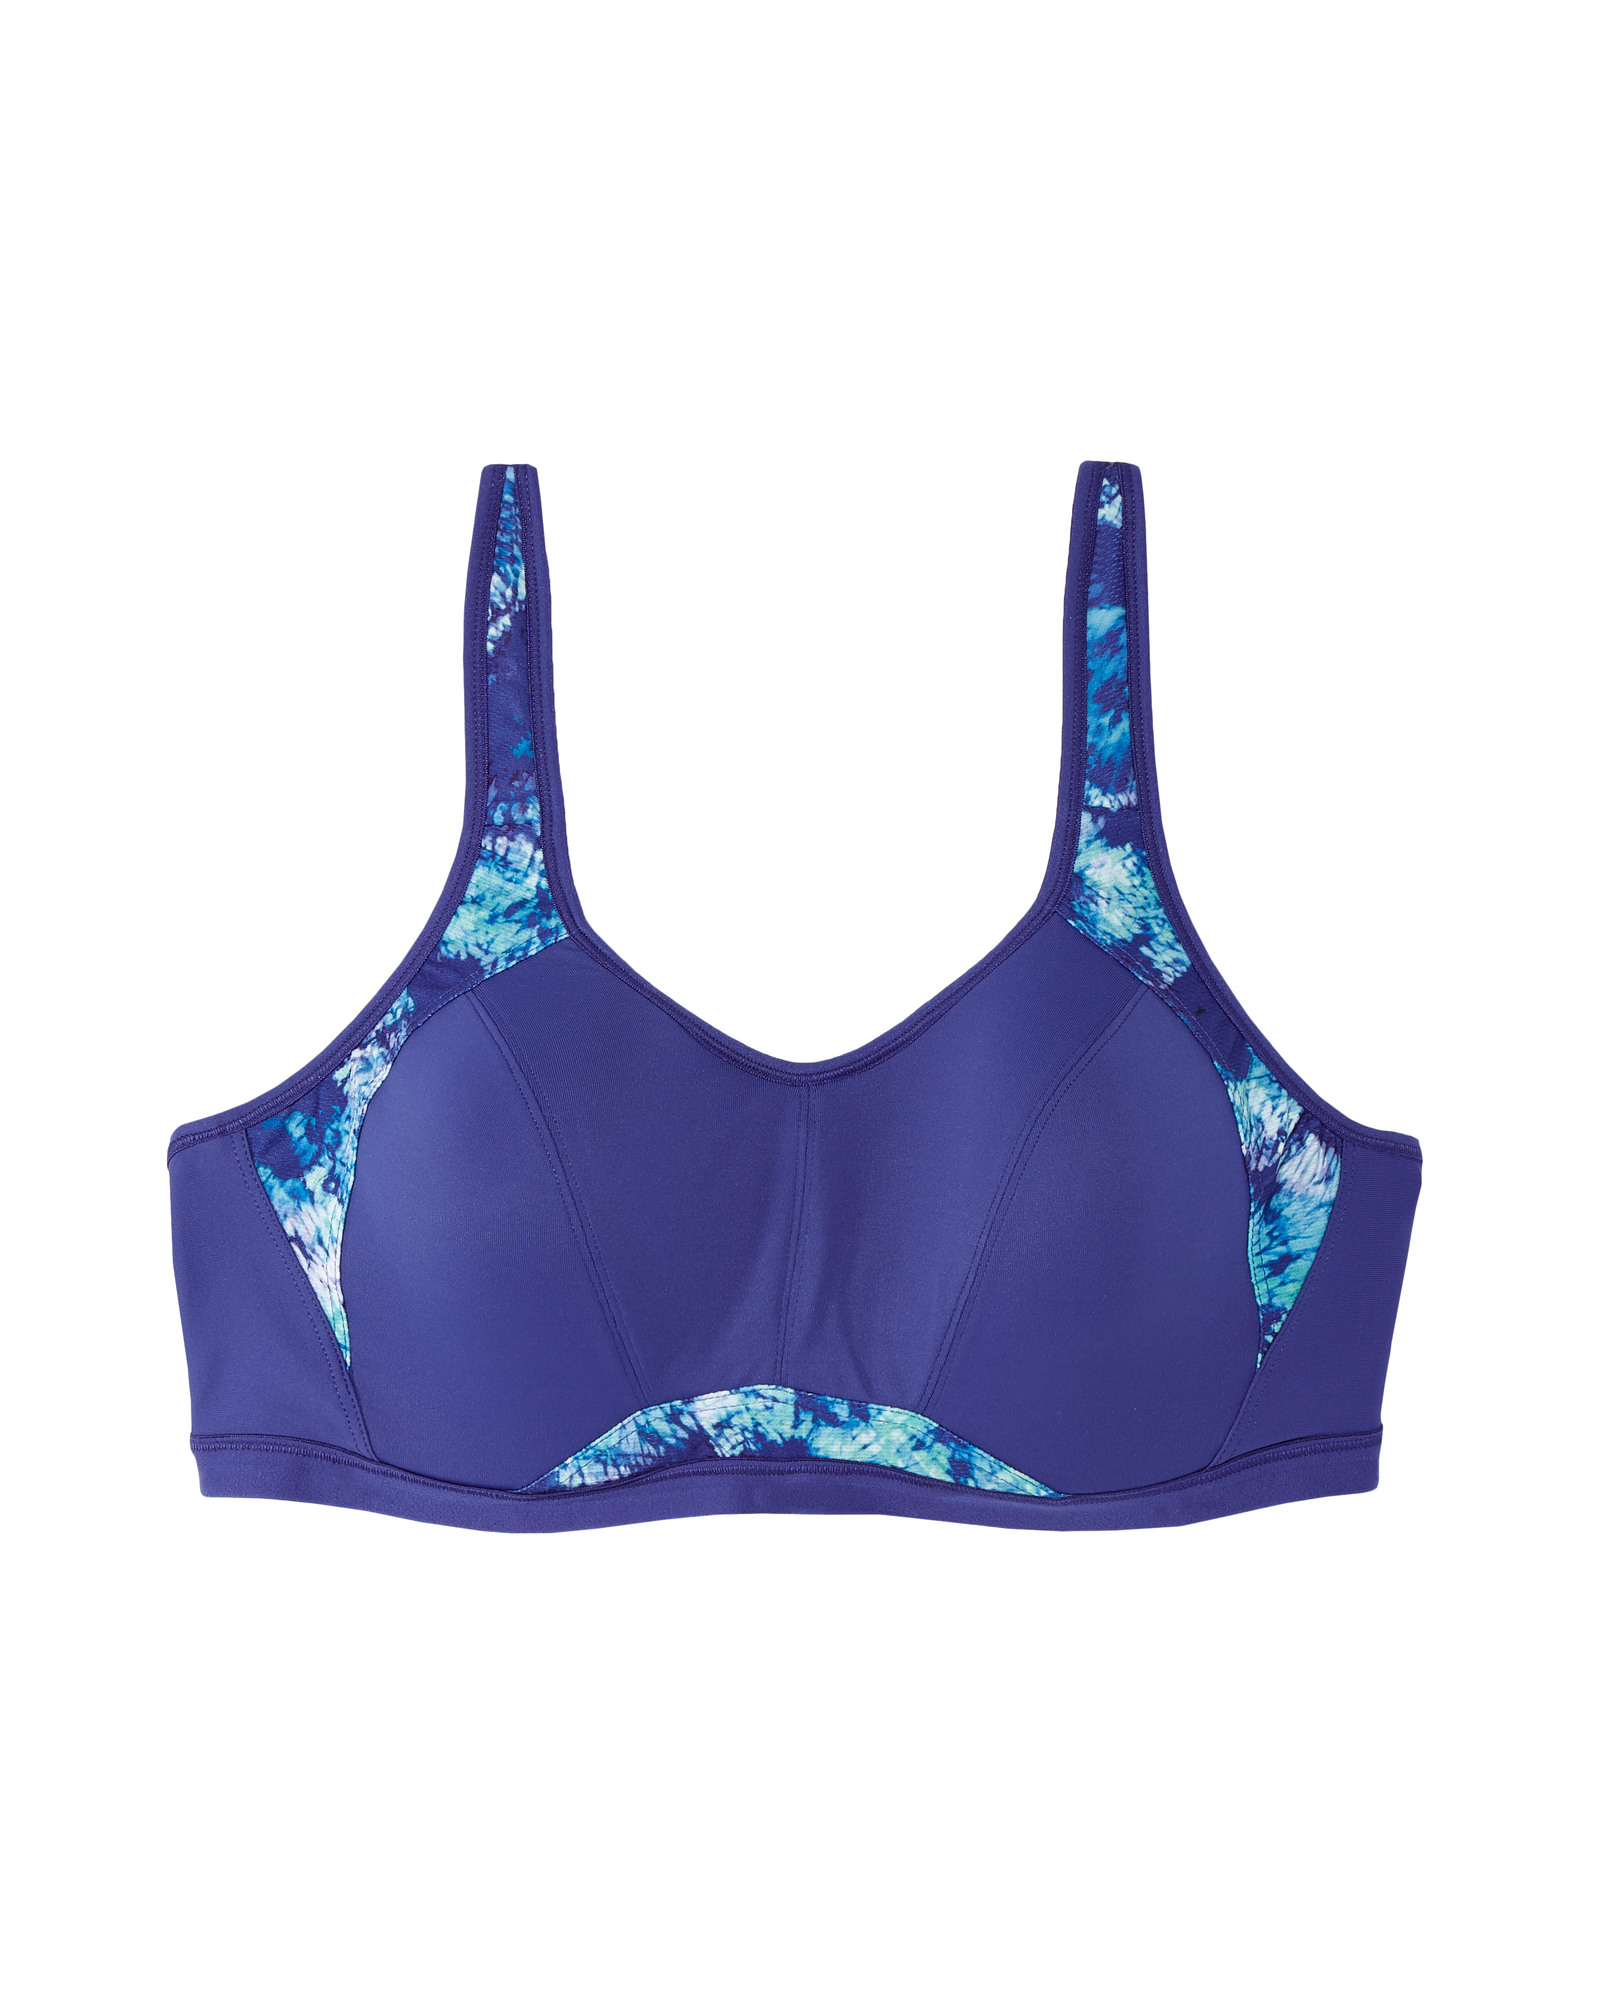 Sparks Underwire Sports Bra | Royal Blue / Turquoise